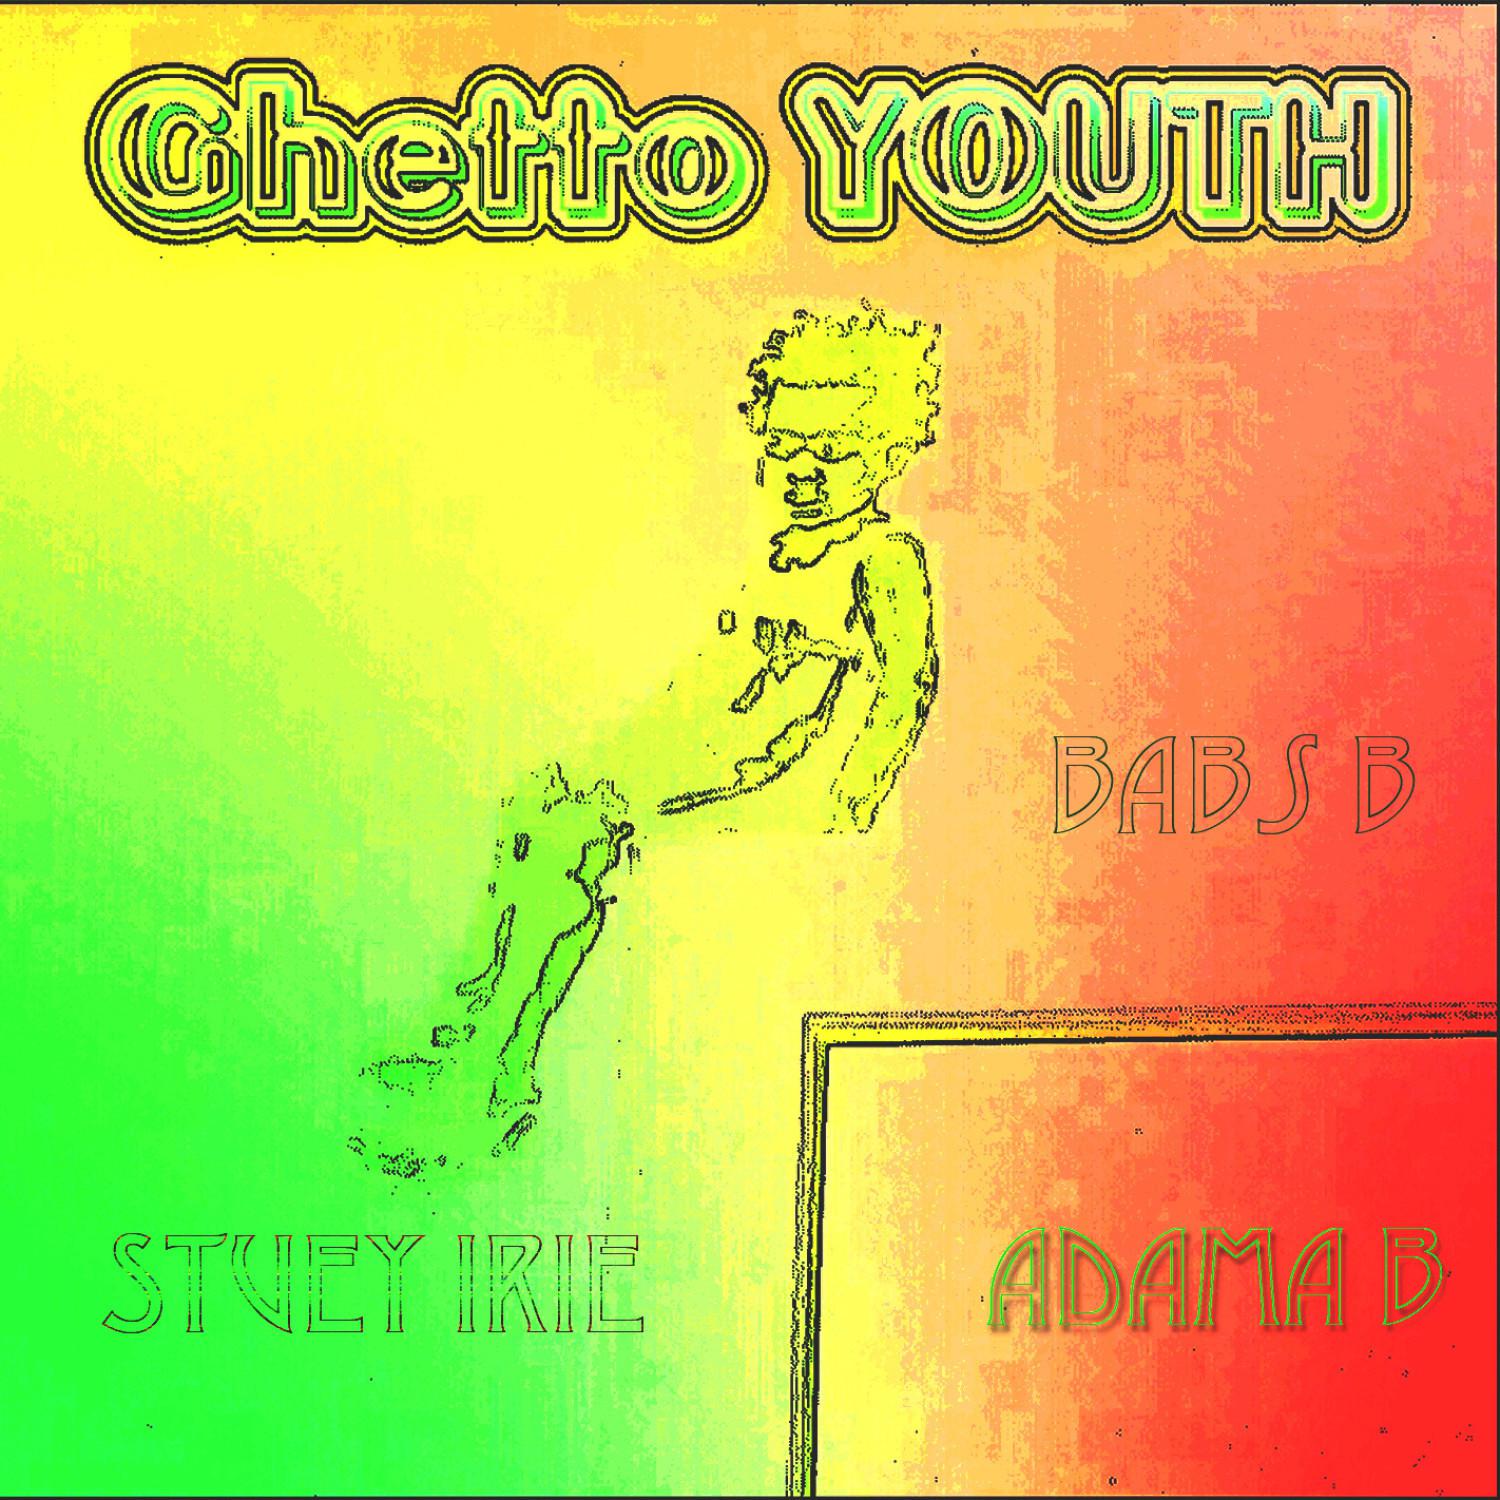 Ghetto Youth